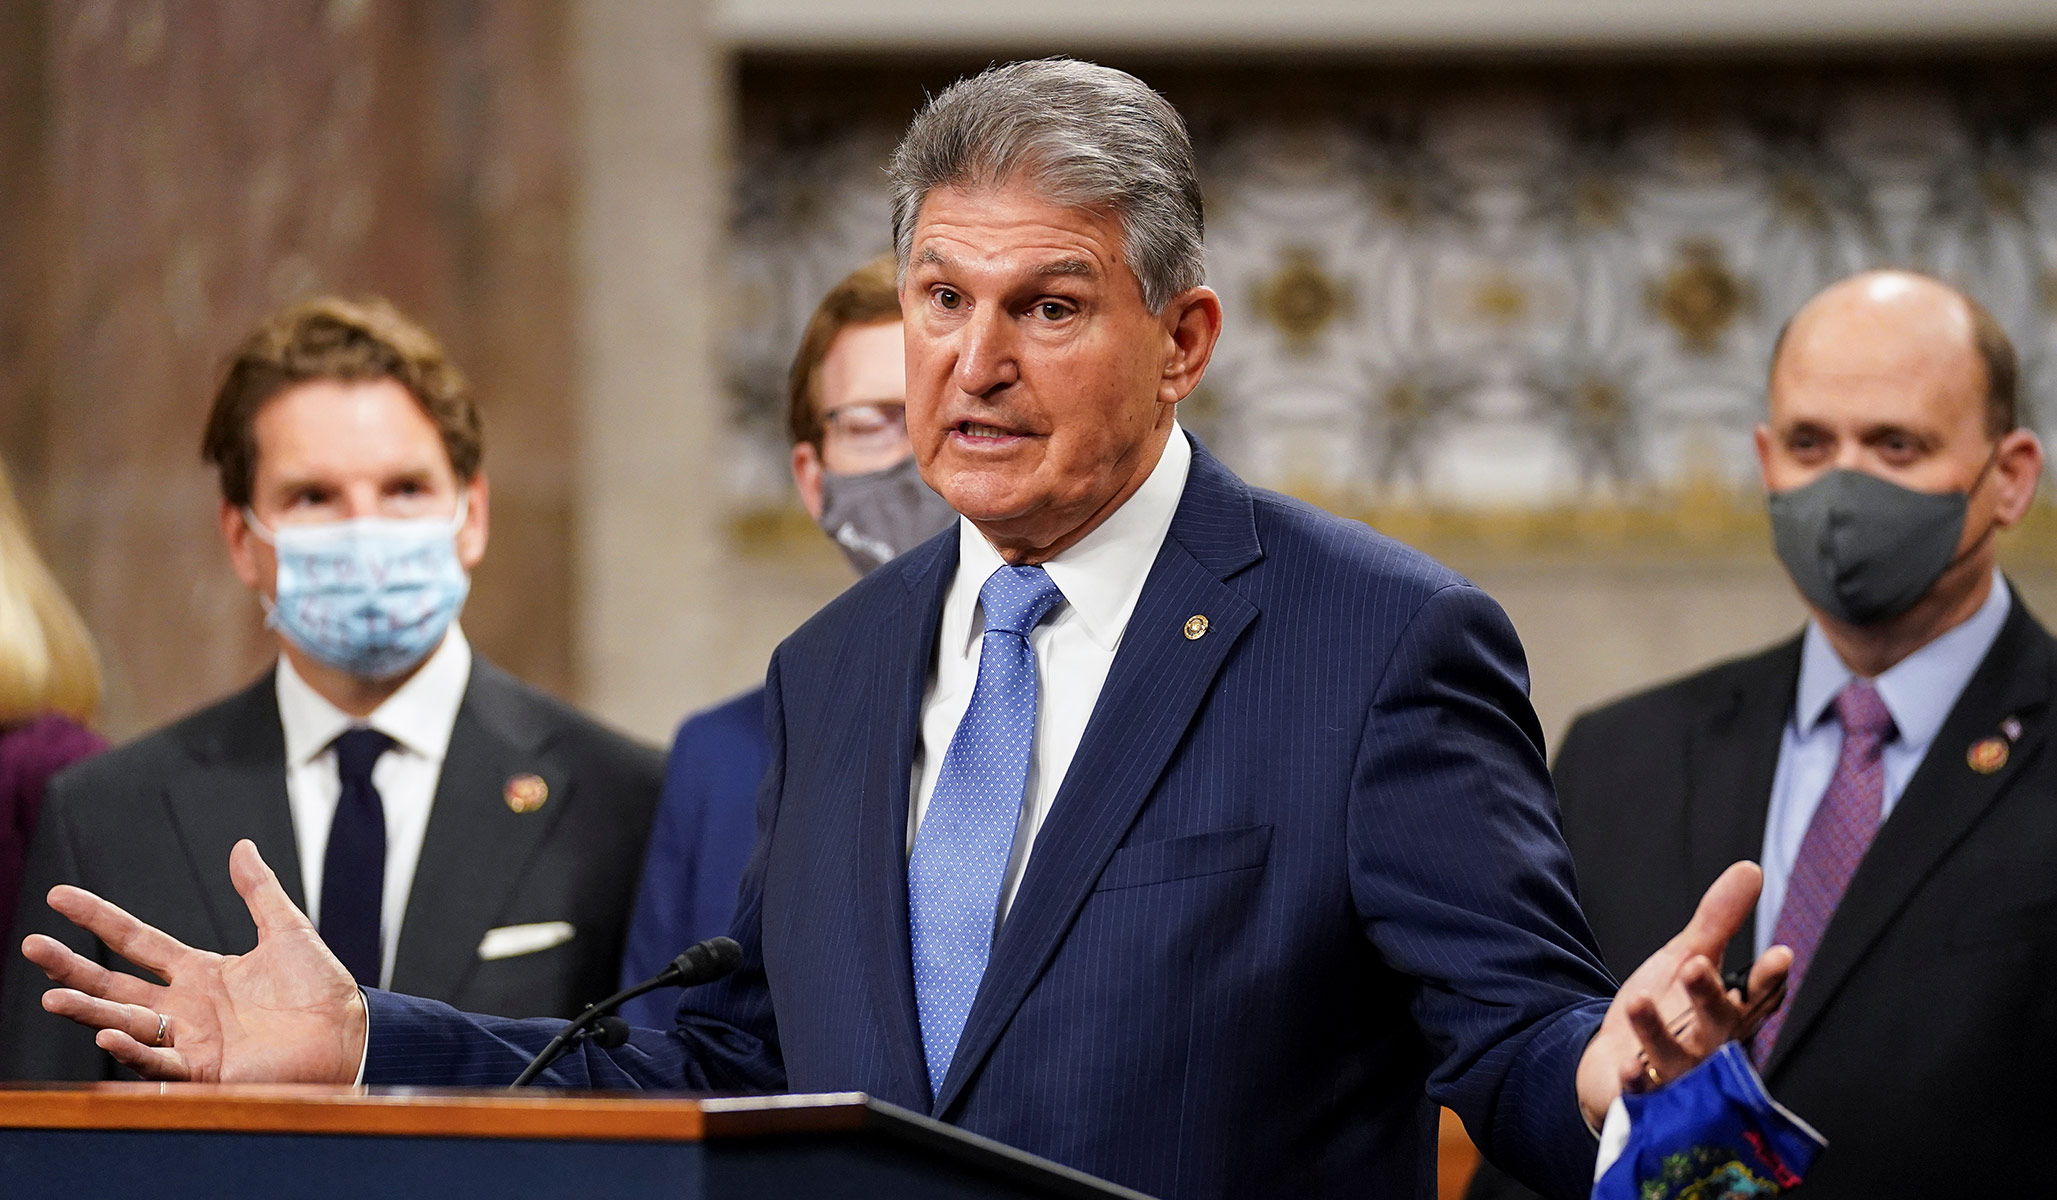 Manchin Welcomes Primary Challenge over Opposition to Nuclear Option for Filibuster